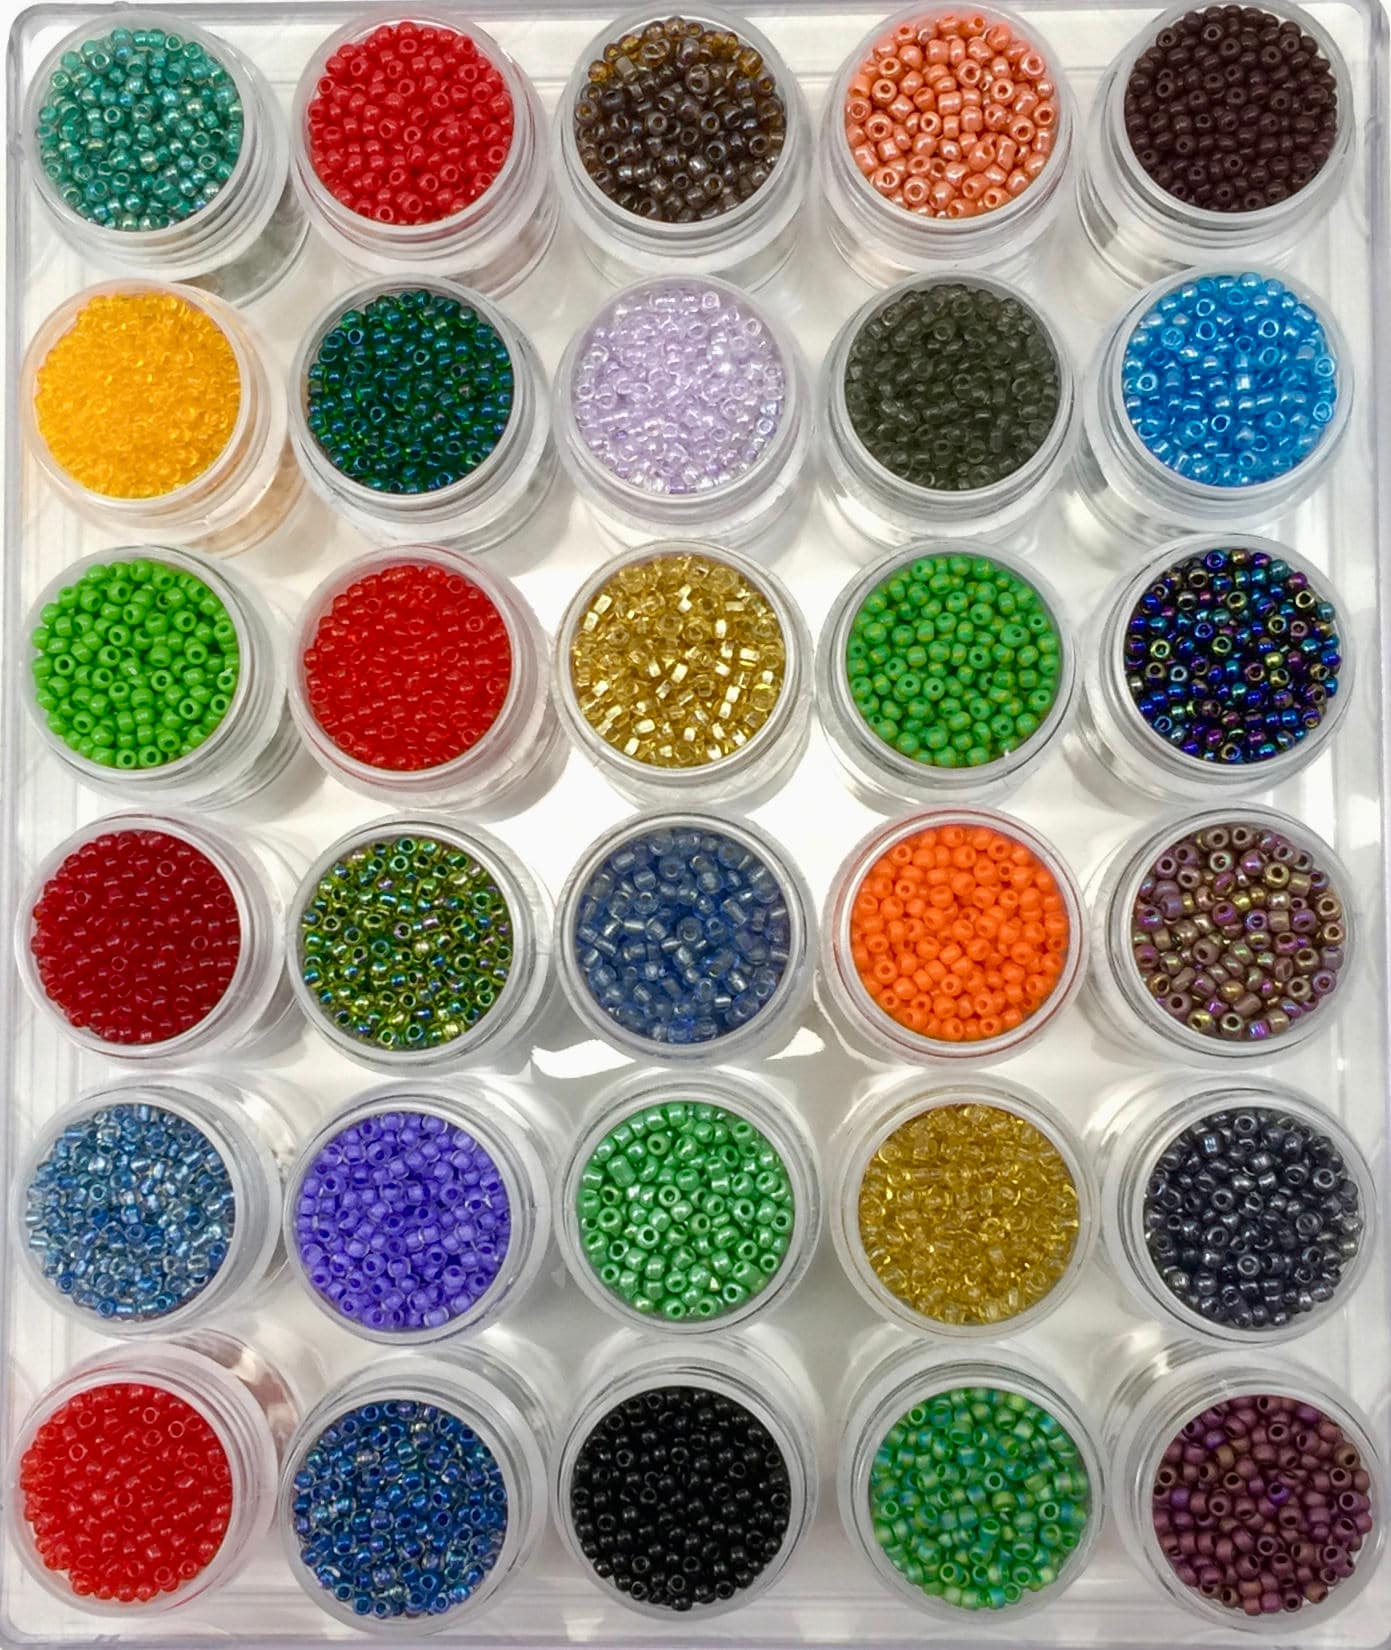 Download 11/0 Seed Bead Kit 30 Colors Seed Beads Craft Supplies